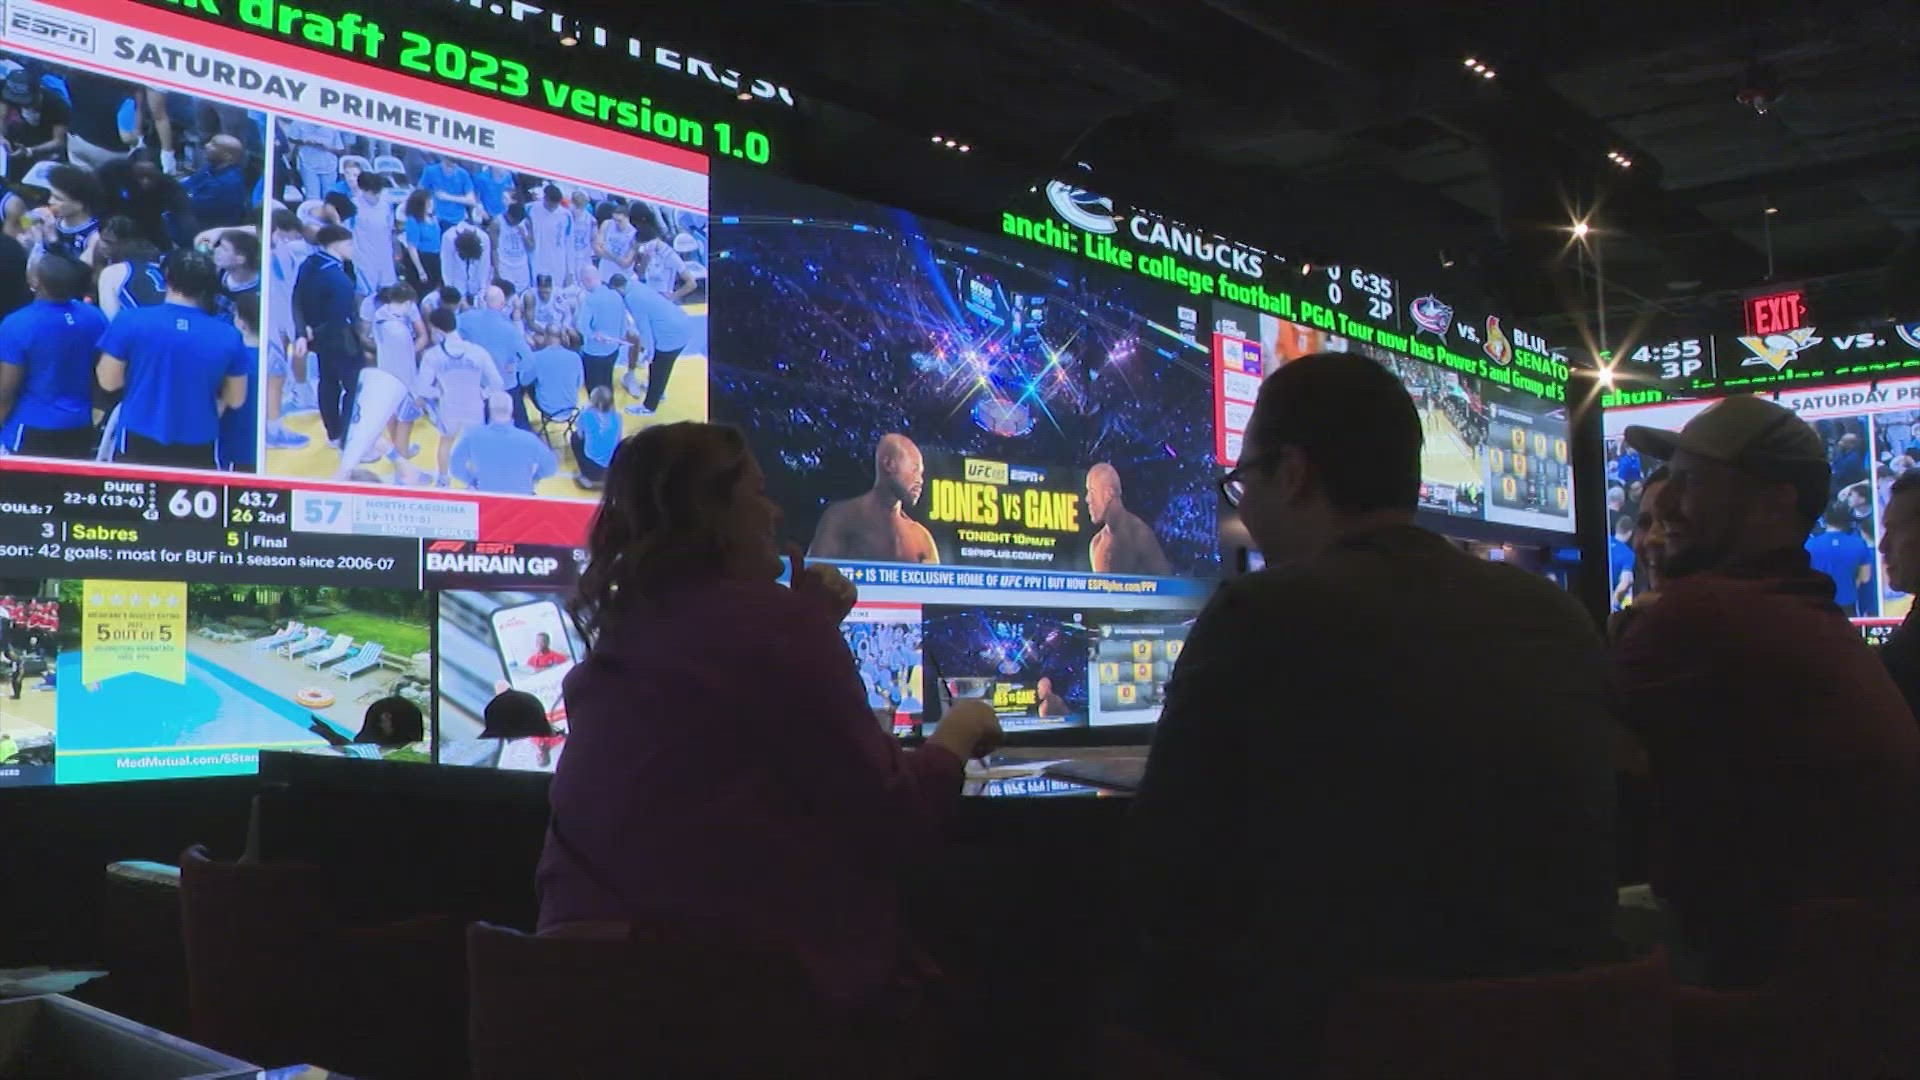 Since sports betting is illegal in Texas, avid sports fans flock to the Golden Nugget in Lake Charles, home of the state's largest sportsbook.